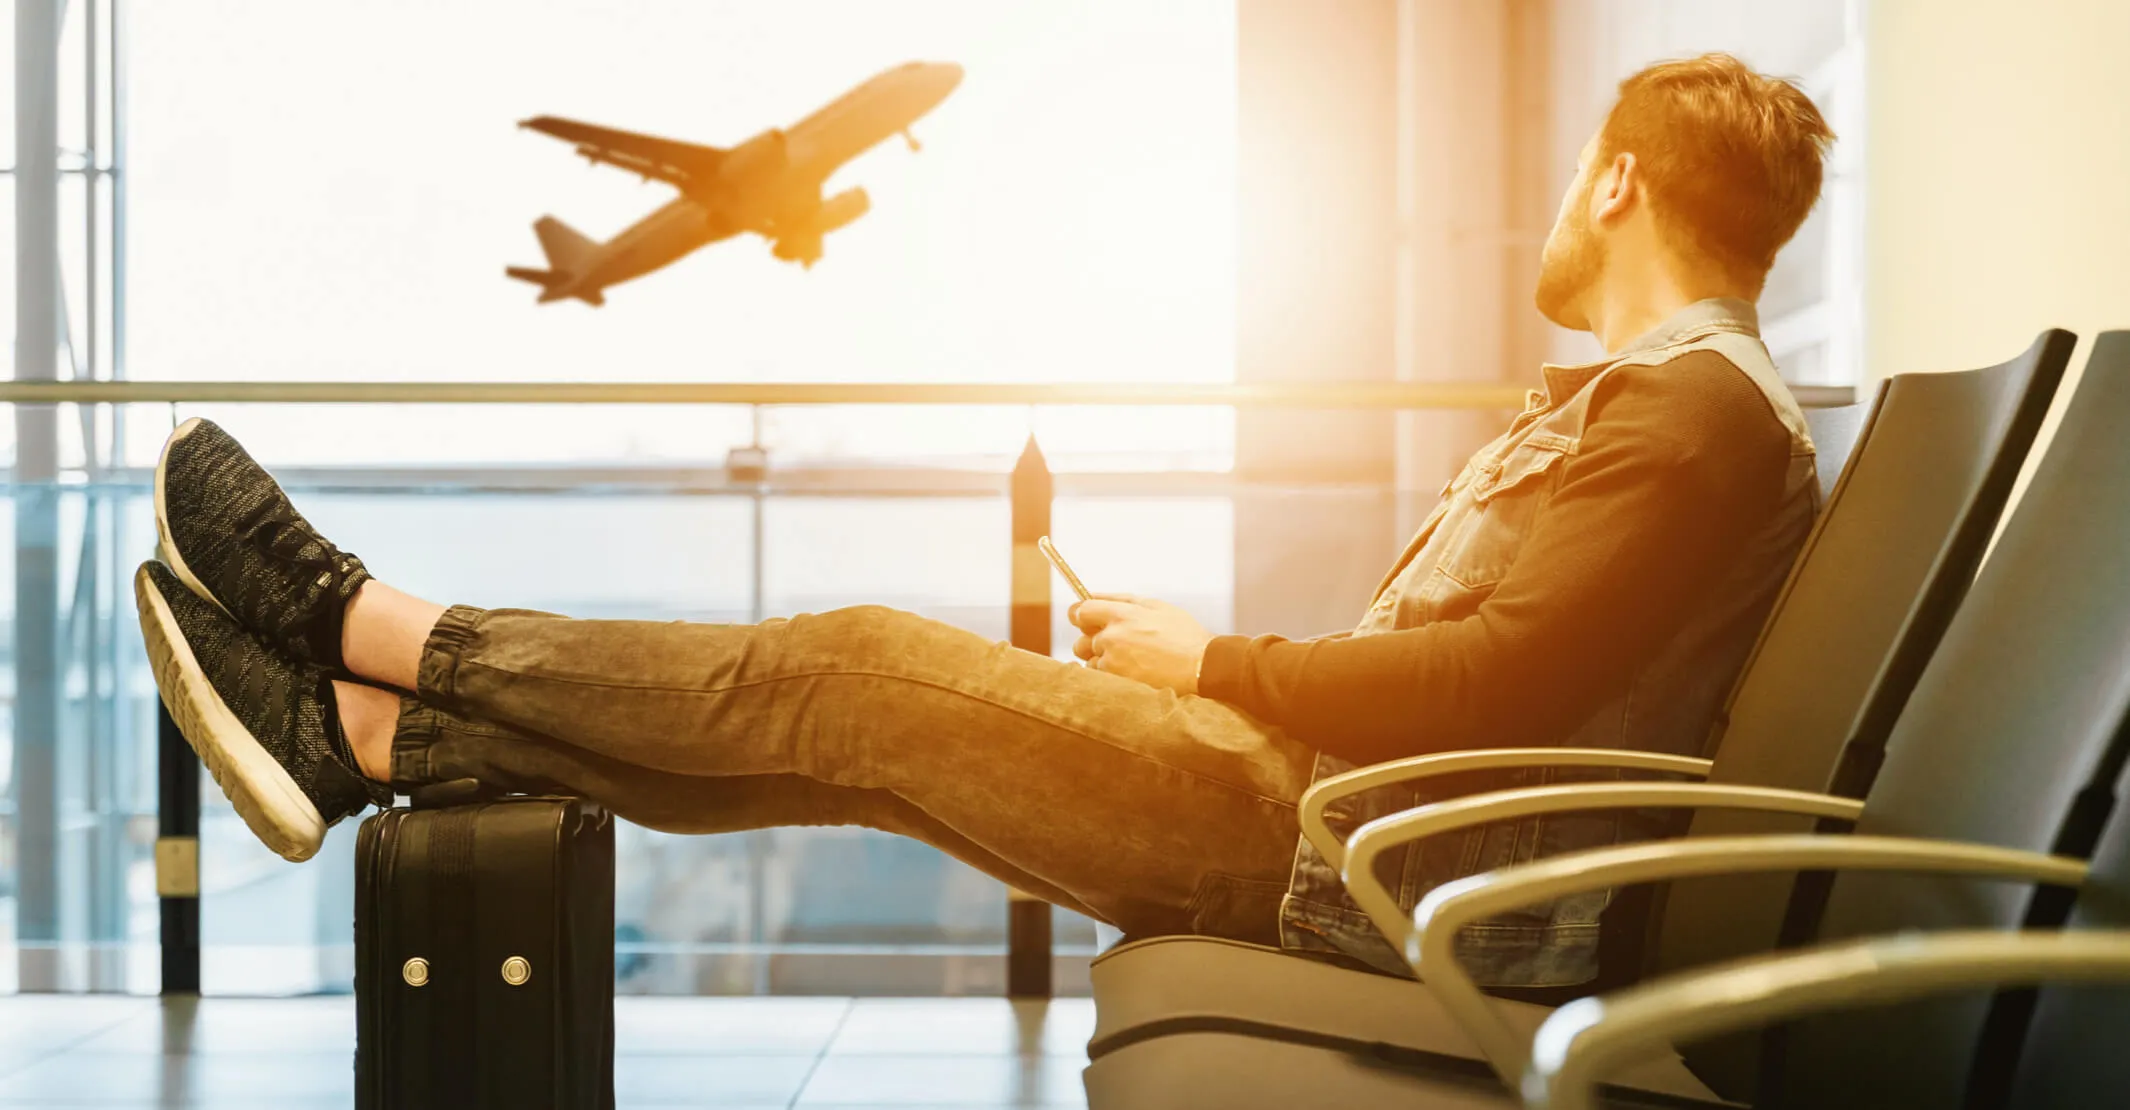 man sitting in airport with his feet up on his luggage watching plane take off